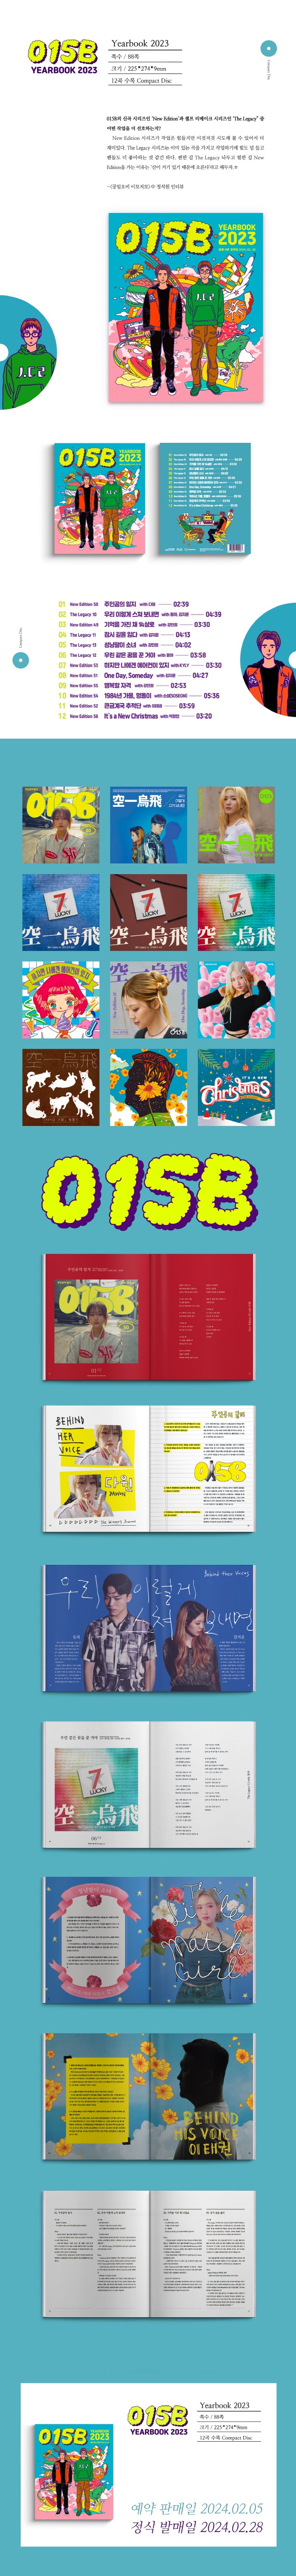 015B's 2023 settlement album, [Yearbook 2023] released - Behind, the music released by 015B over the past year and the sto...